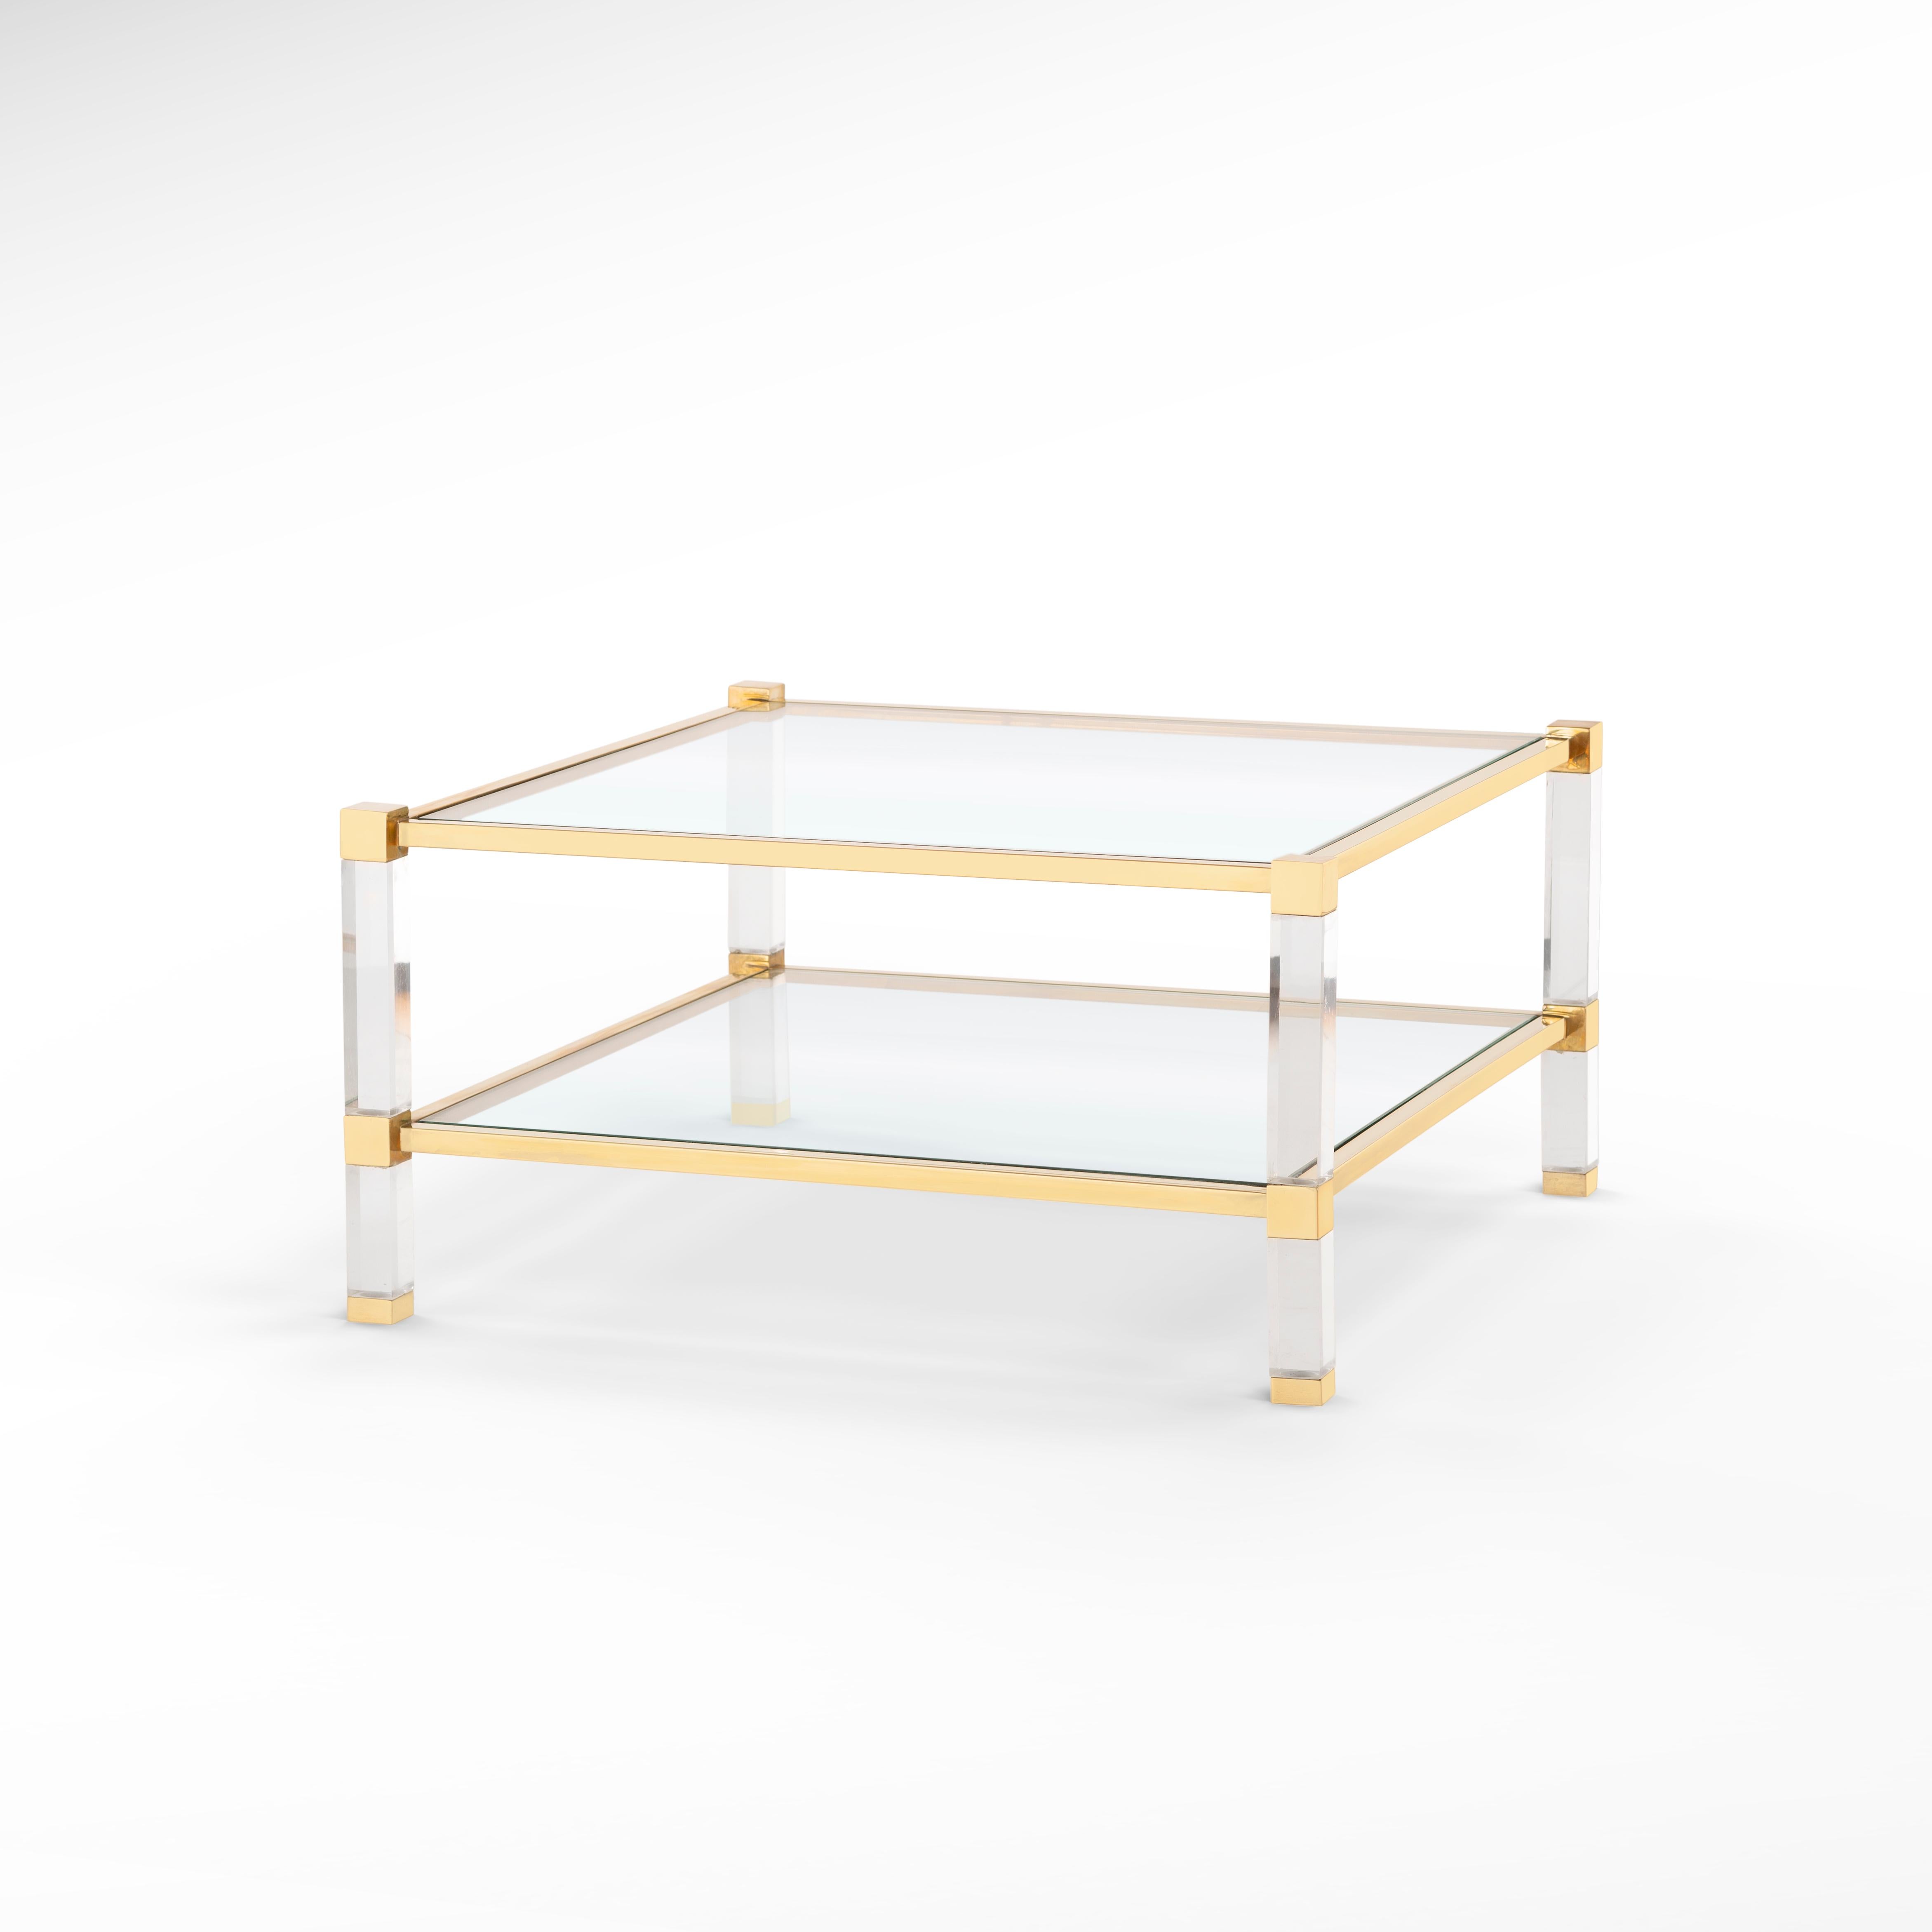 Timeless brass & plexiglass/ acrylic side table with glass top & shelf.
Translucent as Moonlight, this plexiglass and brass coffee table will make your space shimmer with elegance. It’s the perfect piece for your home to host guests with a touch of